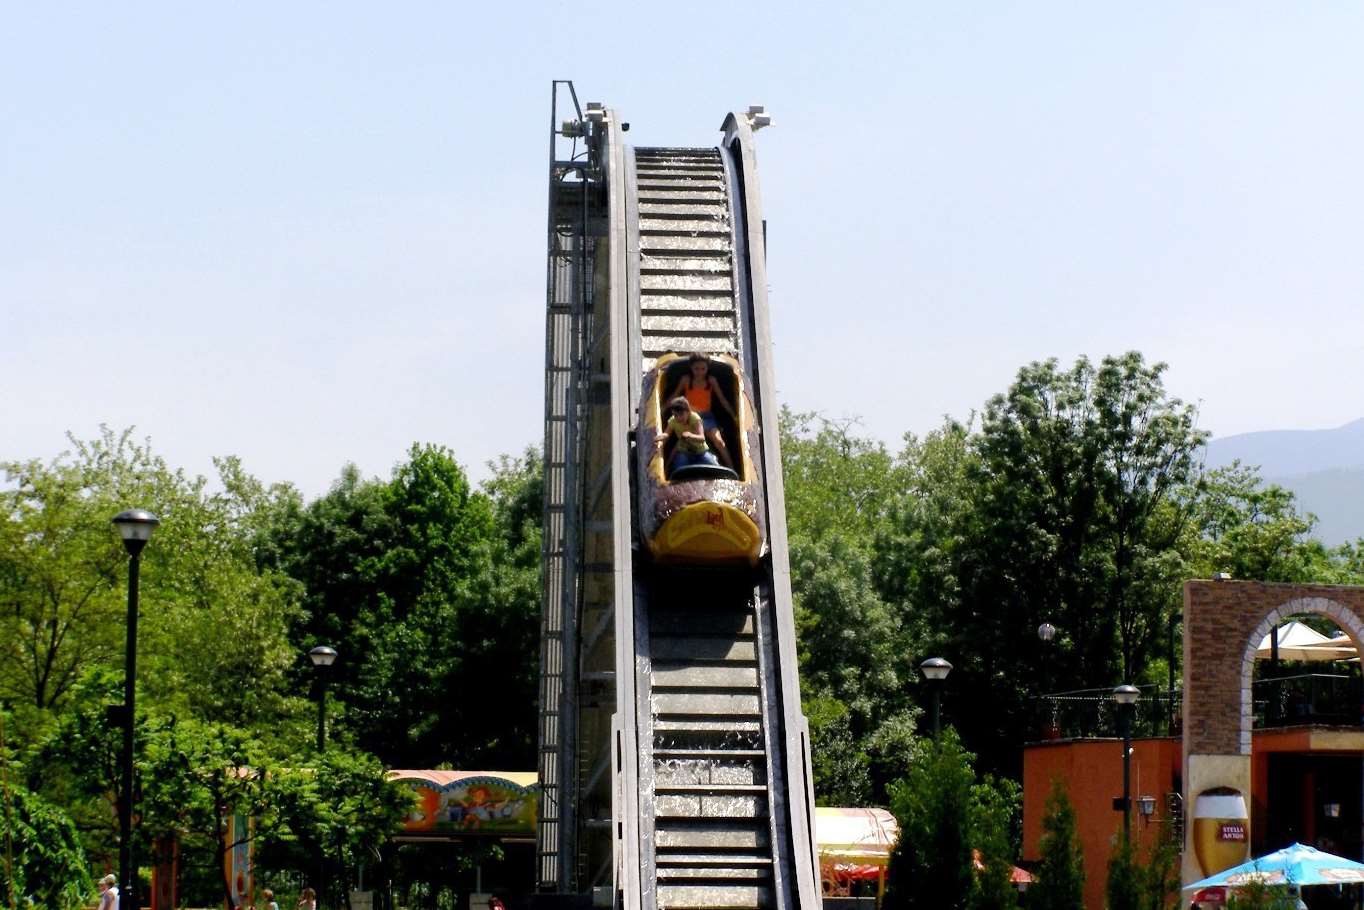 The log flume was bought from Sofia Land in Bulgaria in 2014